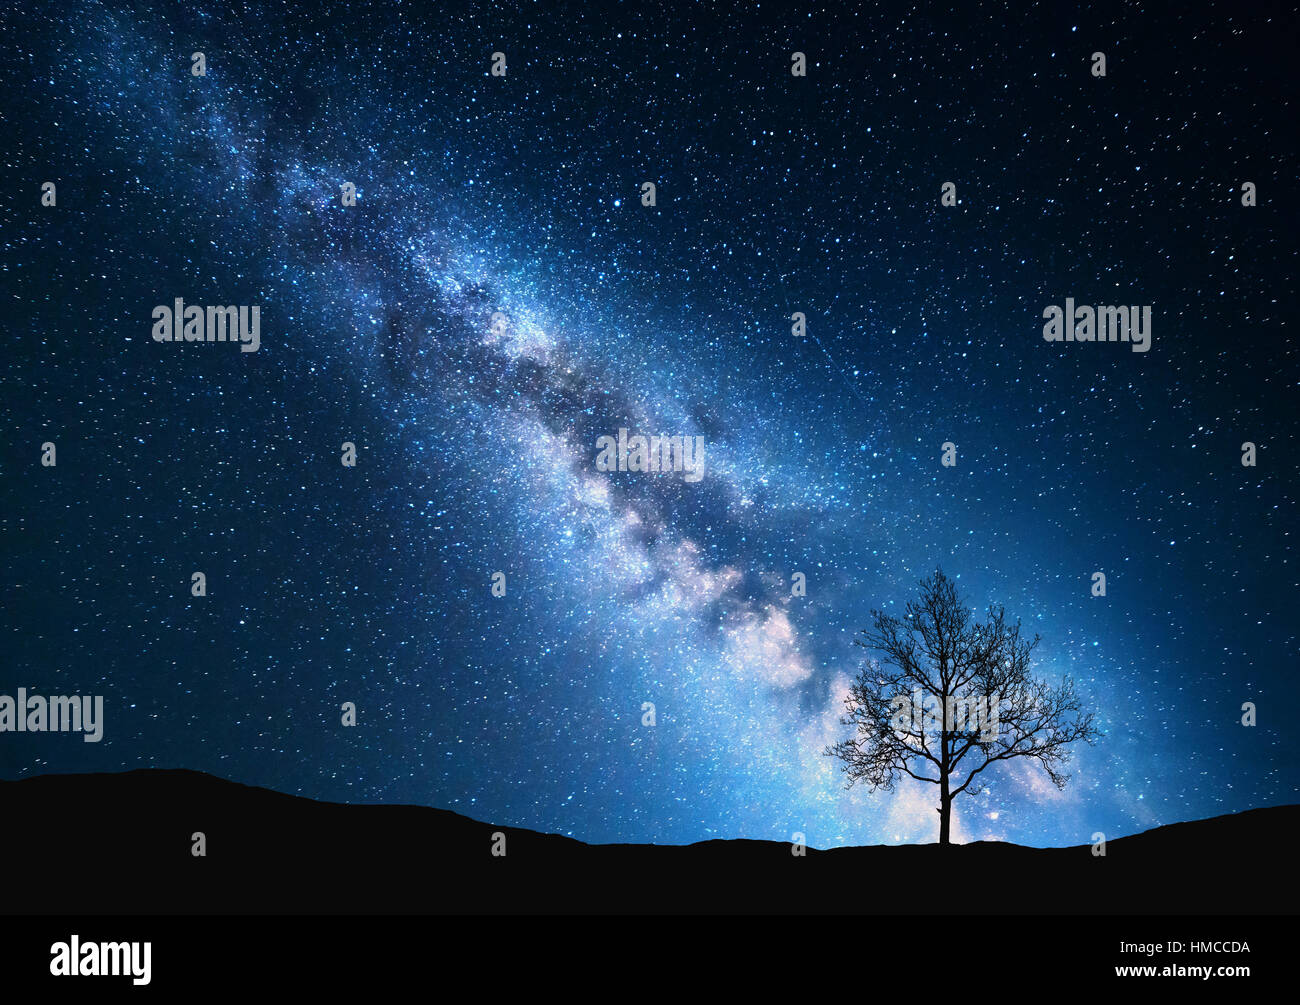 Milky Way and tree on the field. Little tree against night starry sky with blue milky way. Night landscape. Space. Galaxy Stock Photo